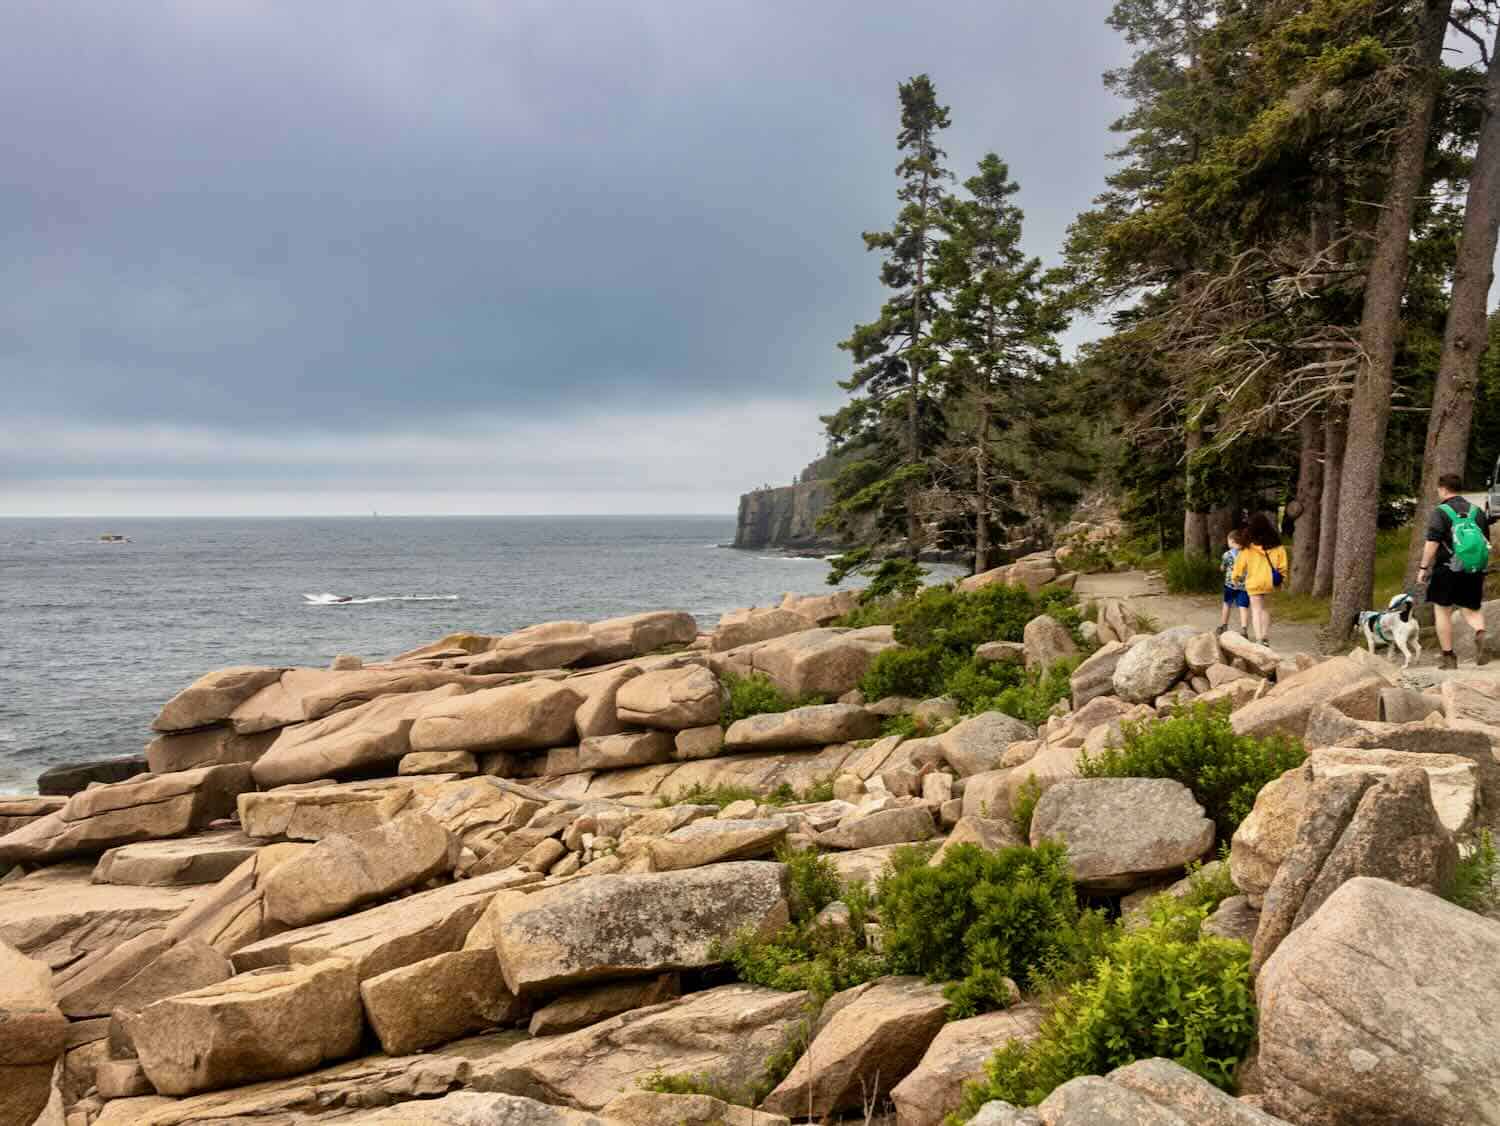 Hikers walk on the Sand Trail Beach next to a rocky coastline in Maine.